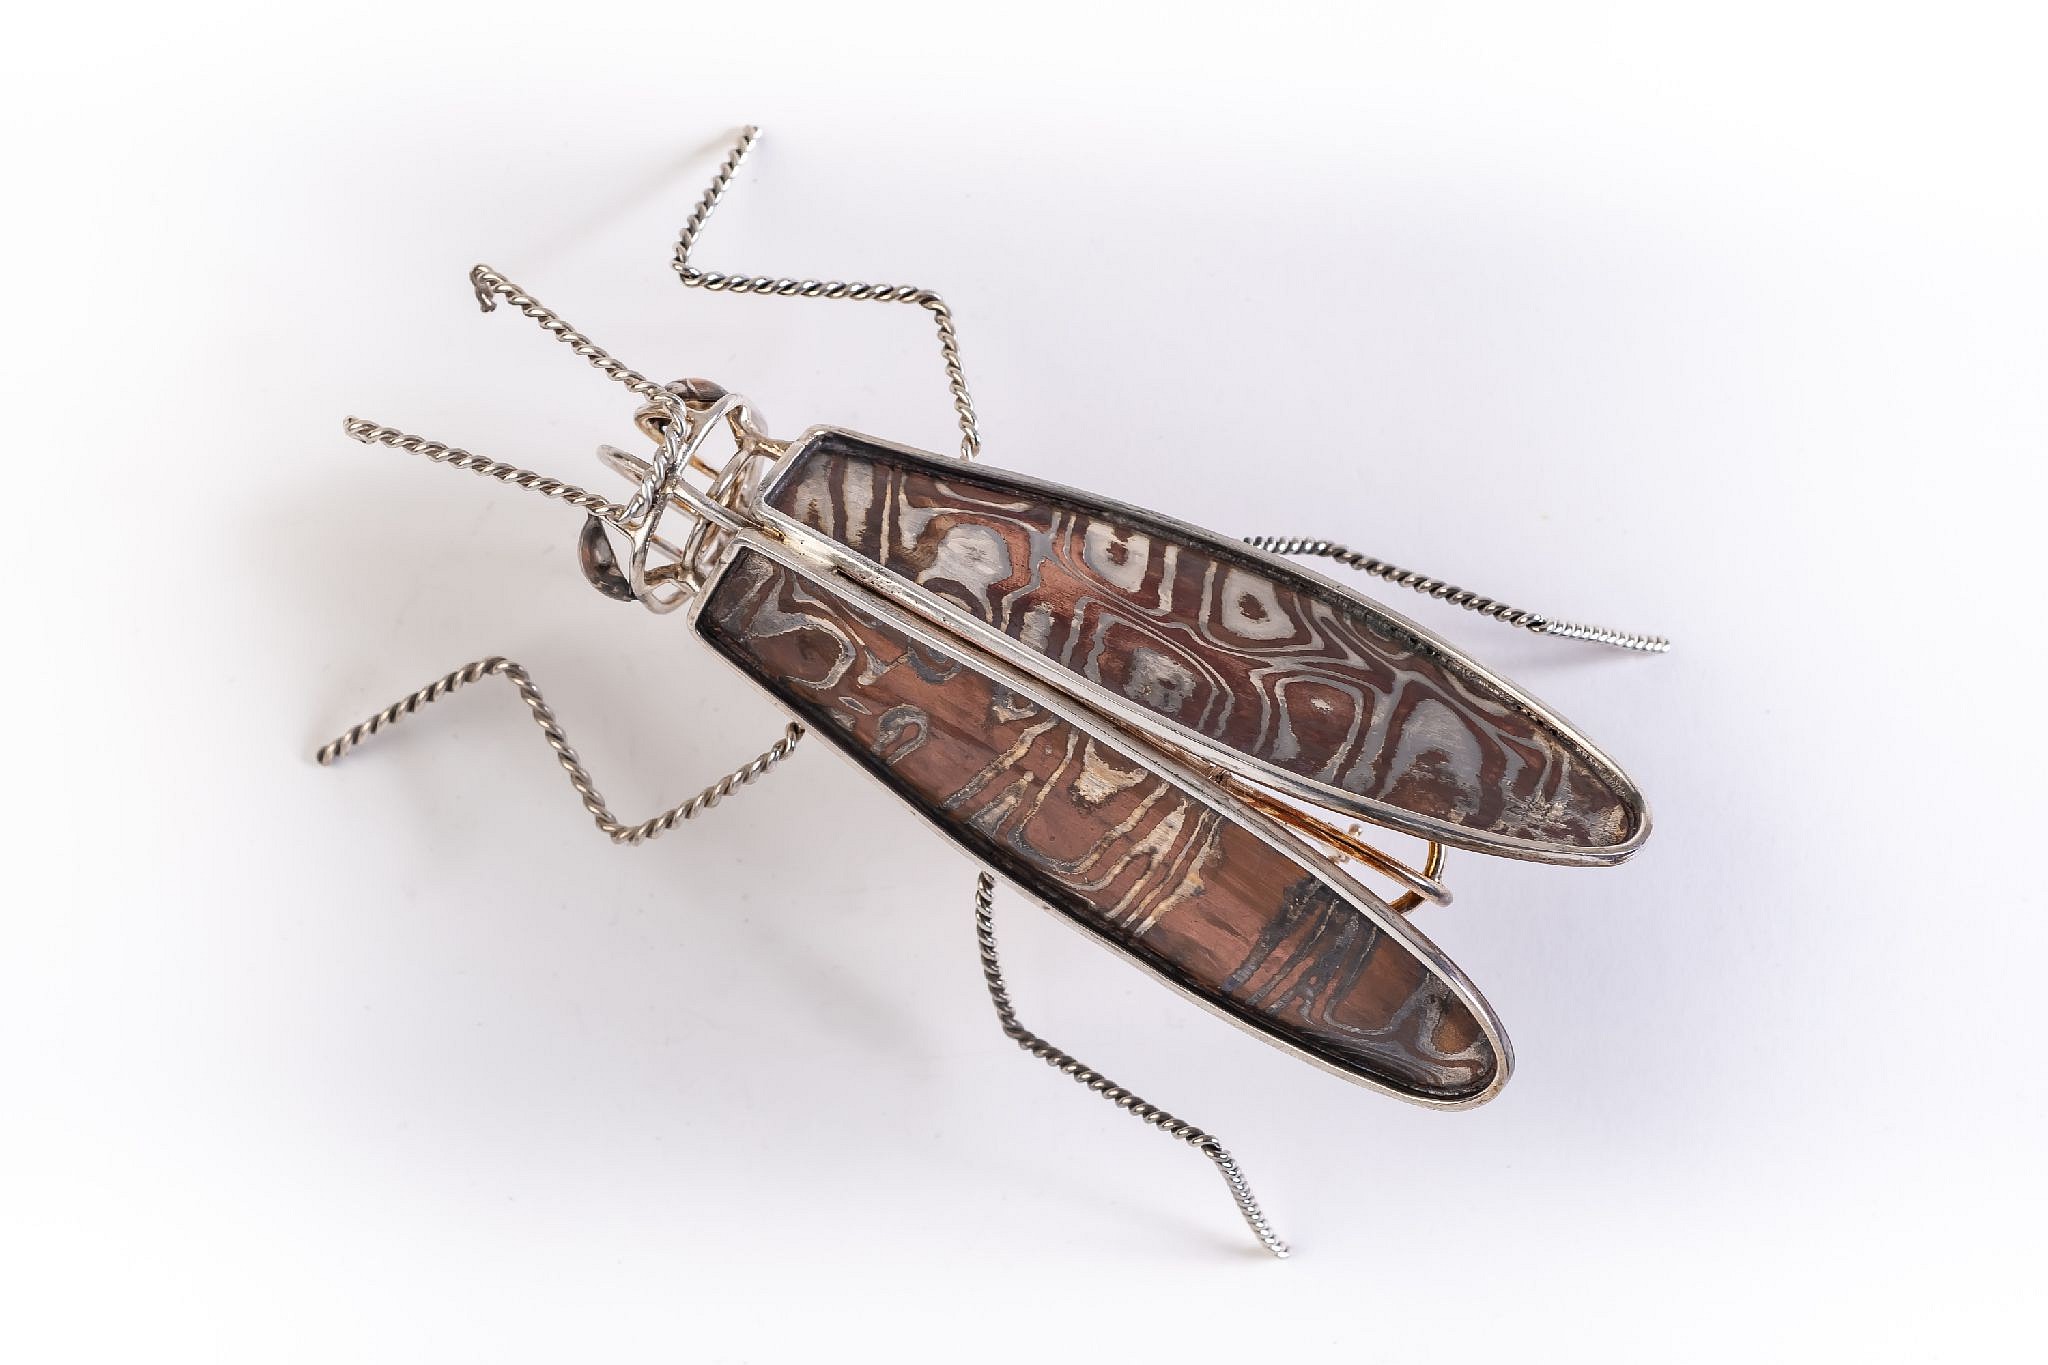 PRESS RELEASE: OUR SECRET WORLD OF INSECTS, May  7 - Jun 30, 2021